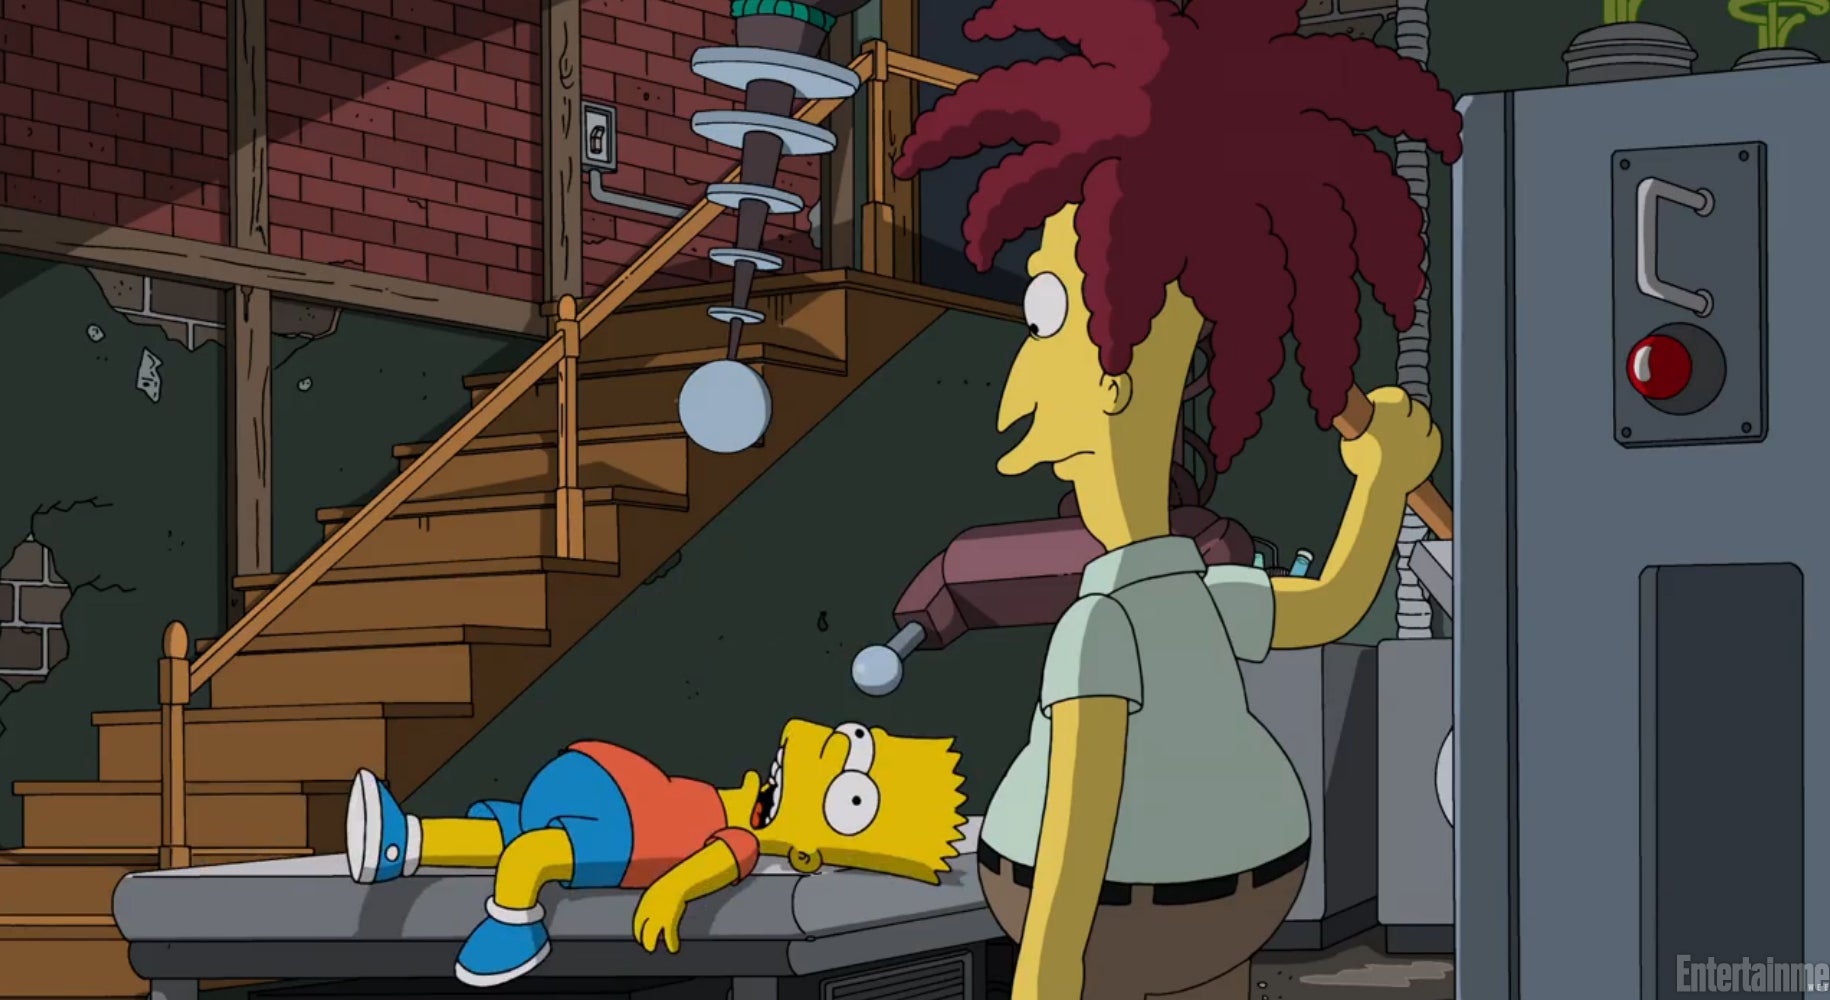 The Simpsons: Watch Sideshow Bob finally kill Bart in Treehouse of Horror.